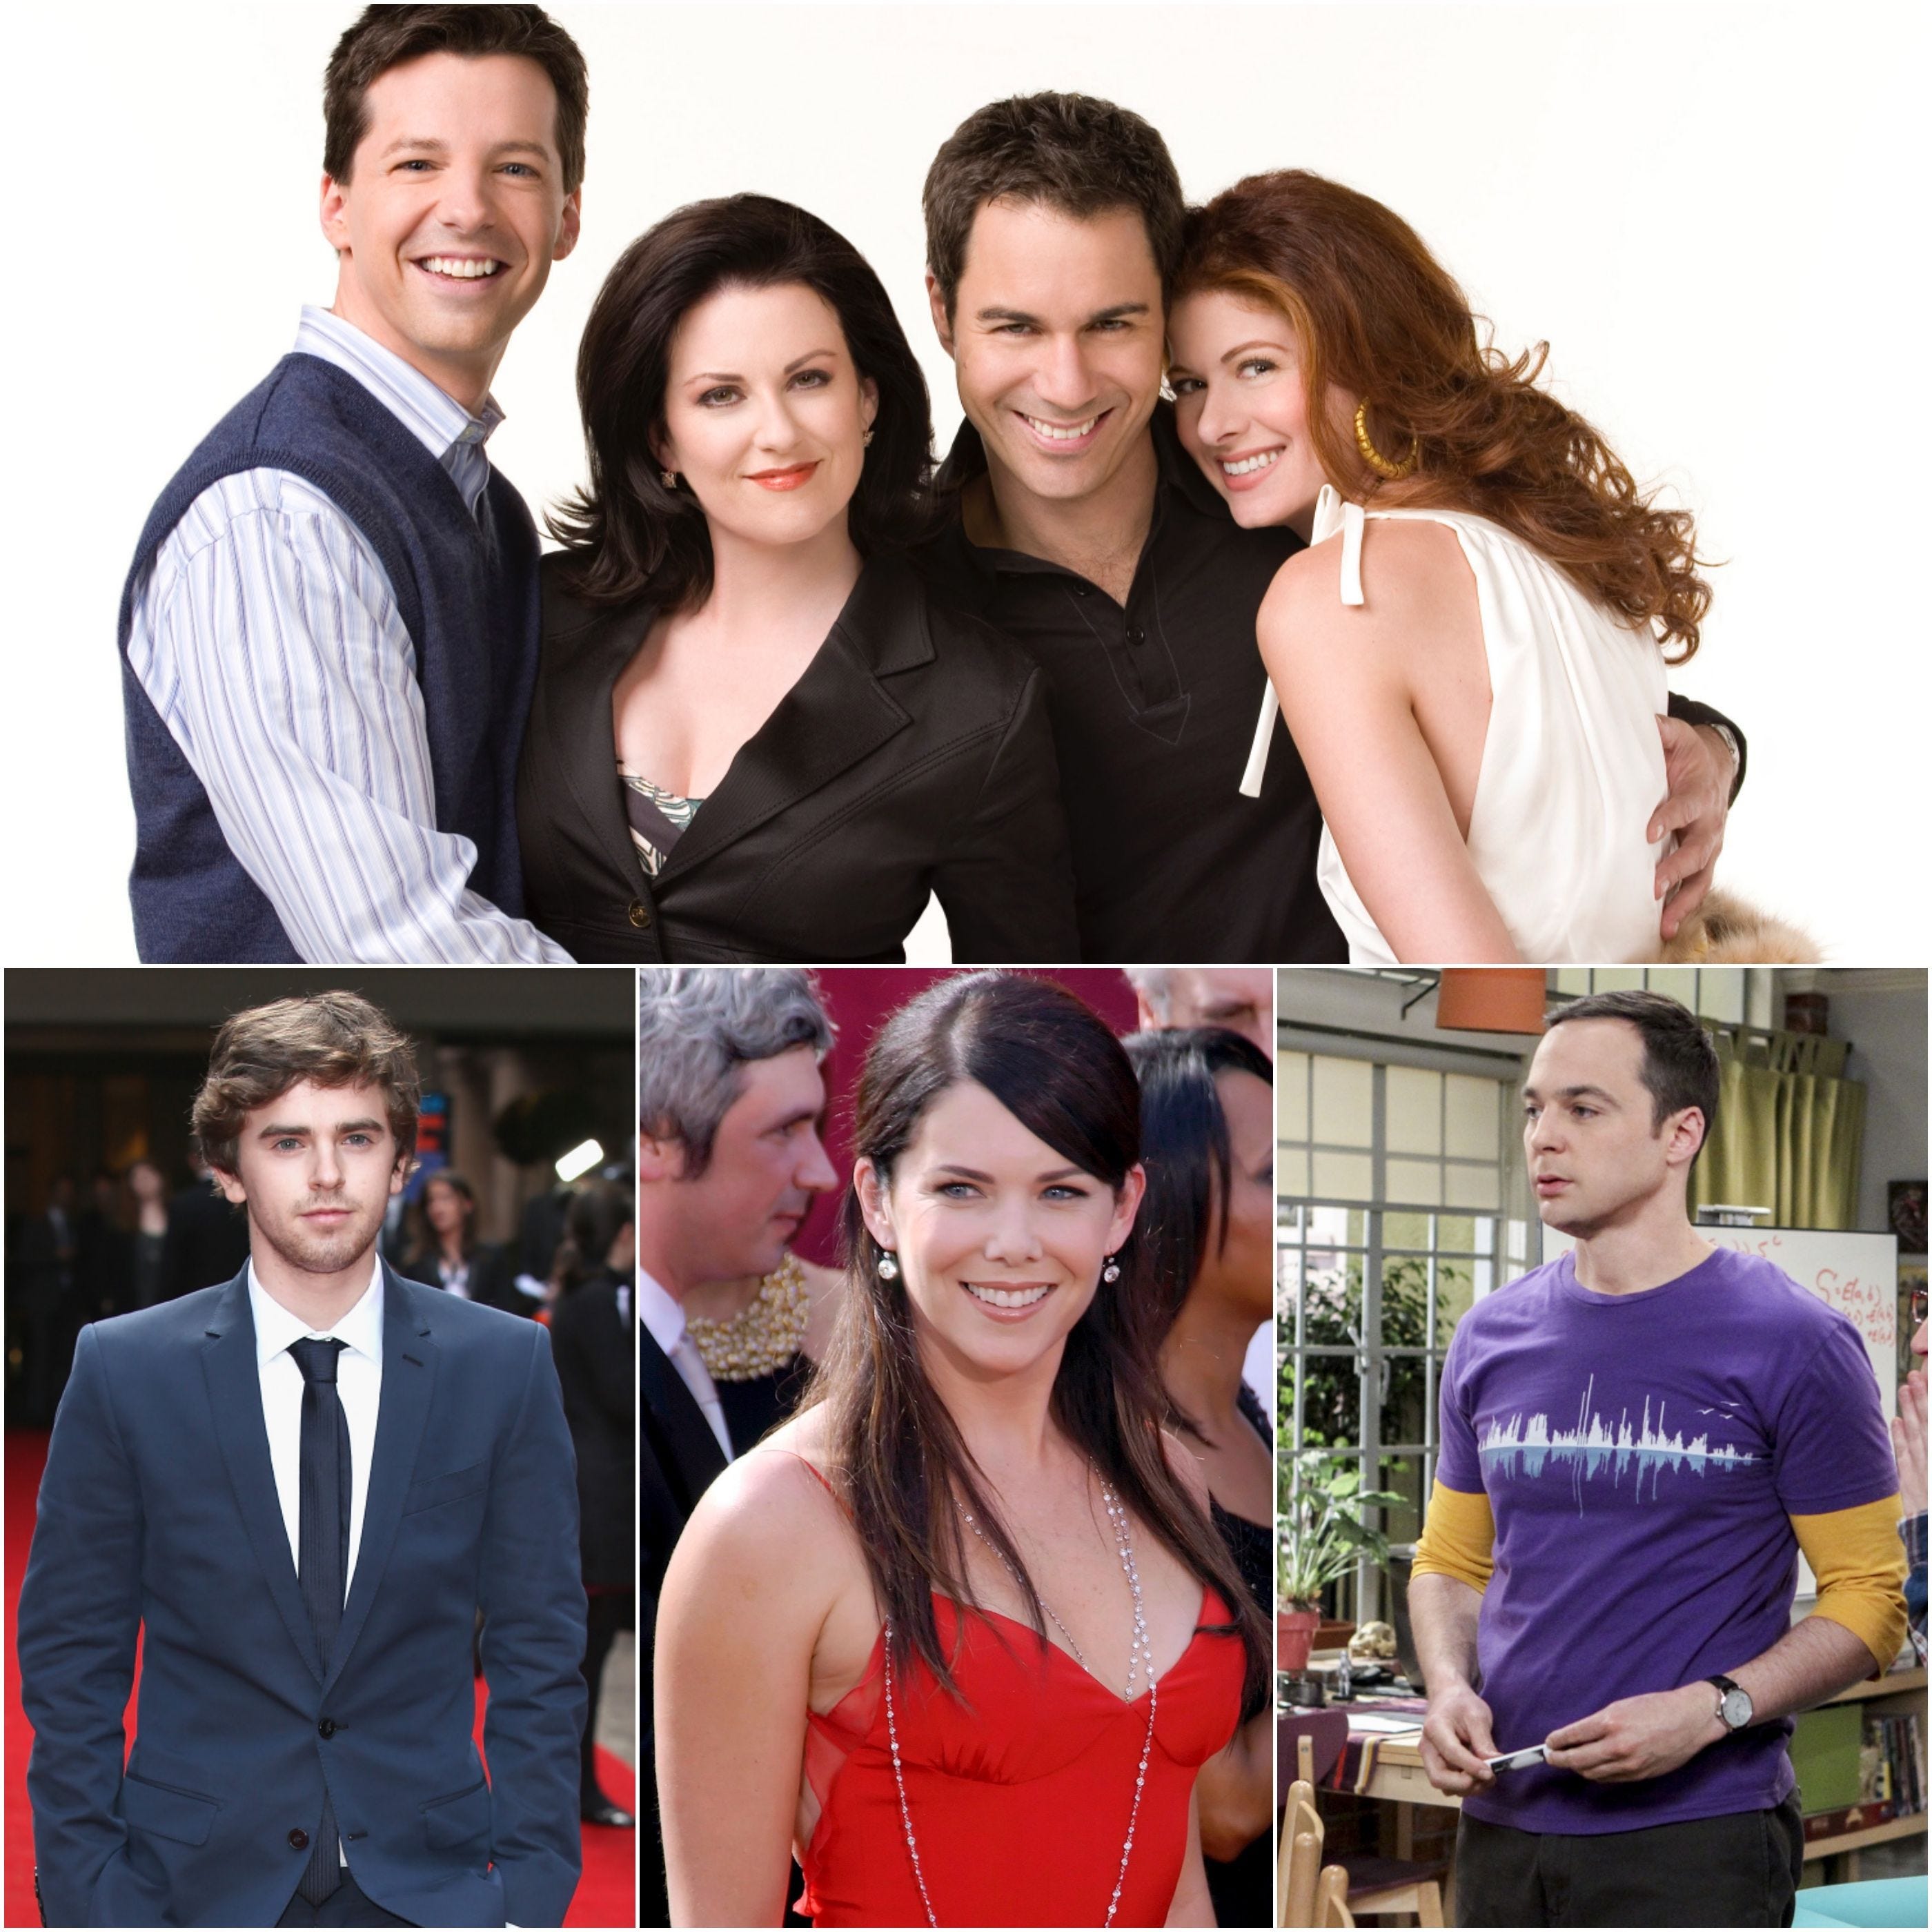 On tap for next TV season: Fewer remakes, more doctors and 'Will & Grace'